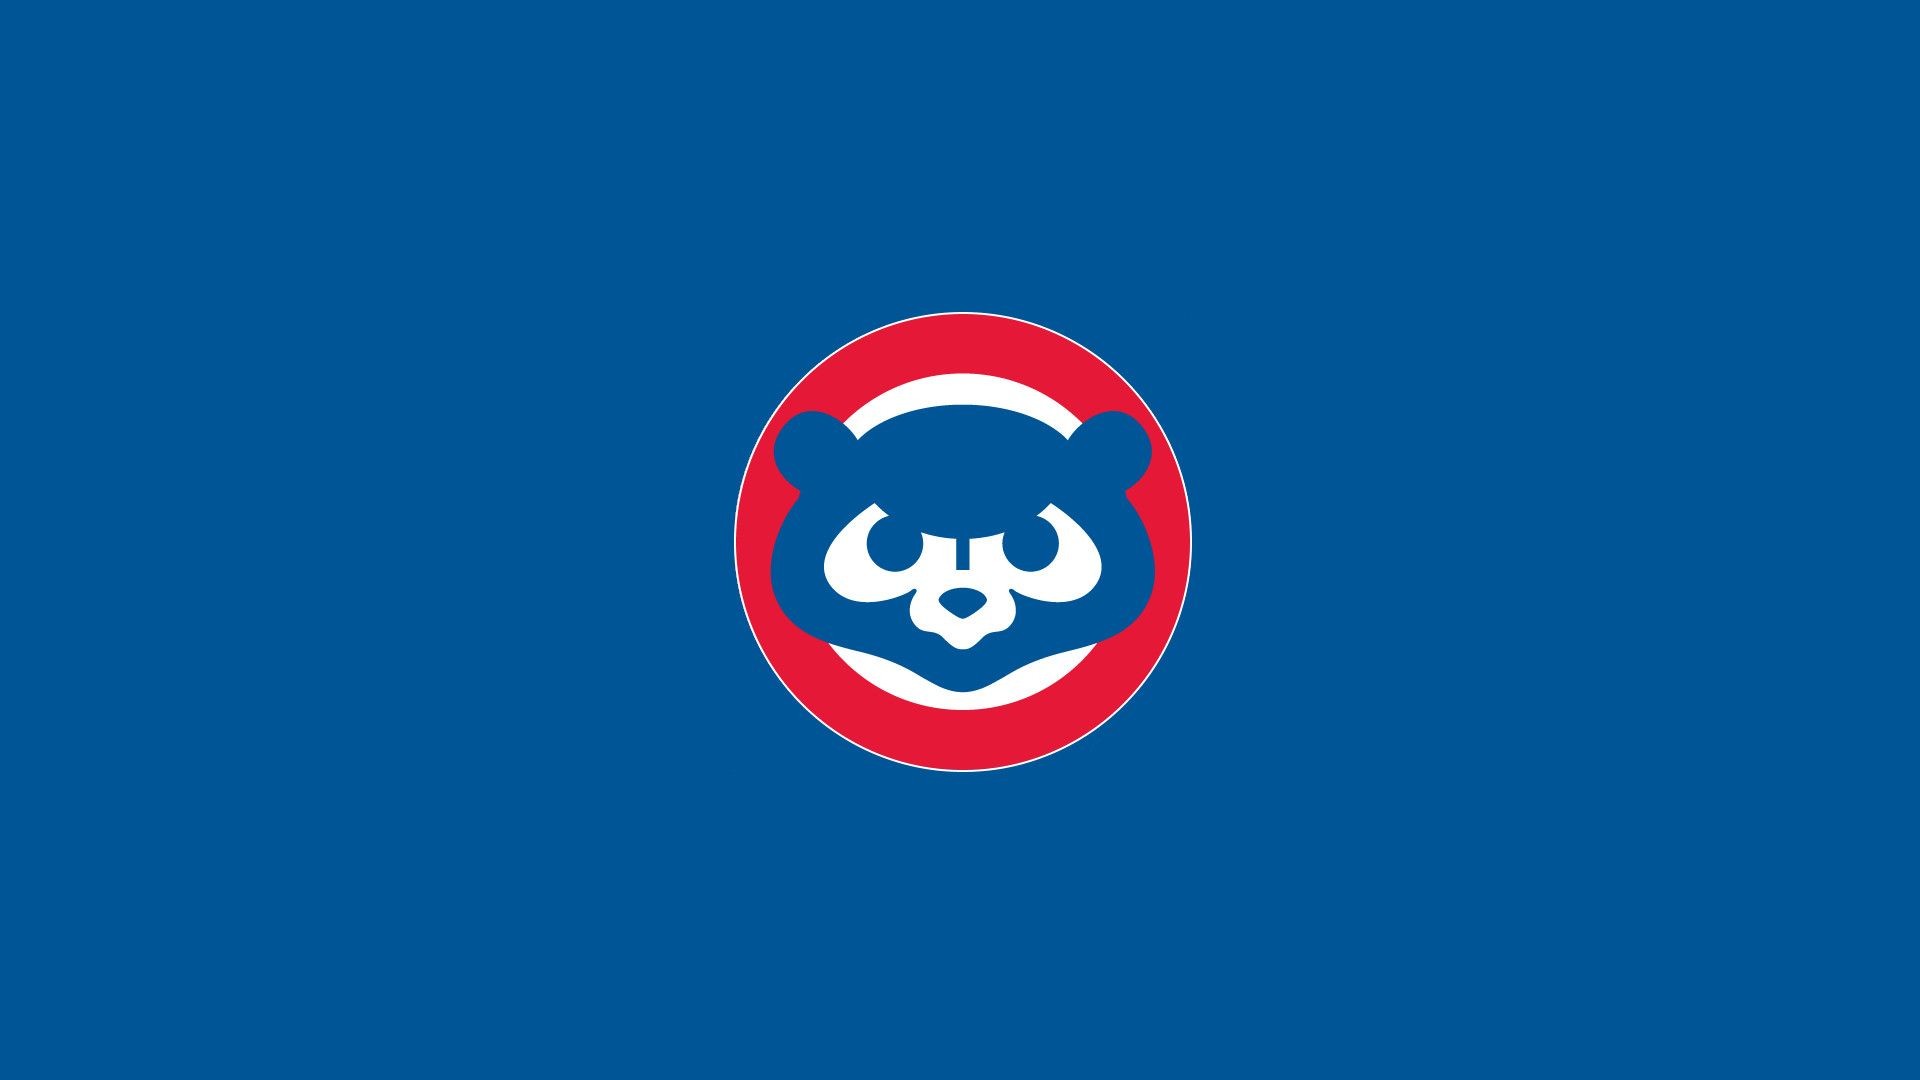 Chicago Cubs 2022 Wallpaper 72 Images 1920x1080